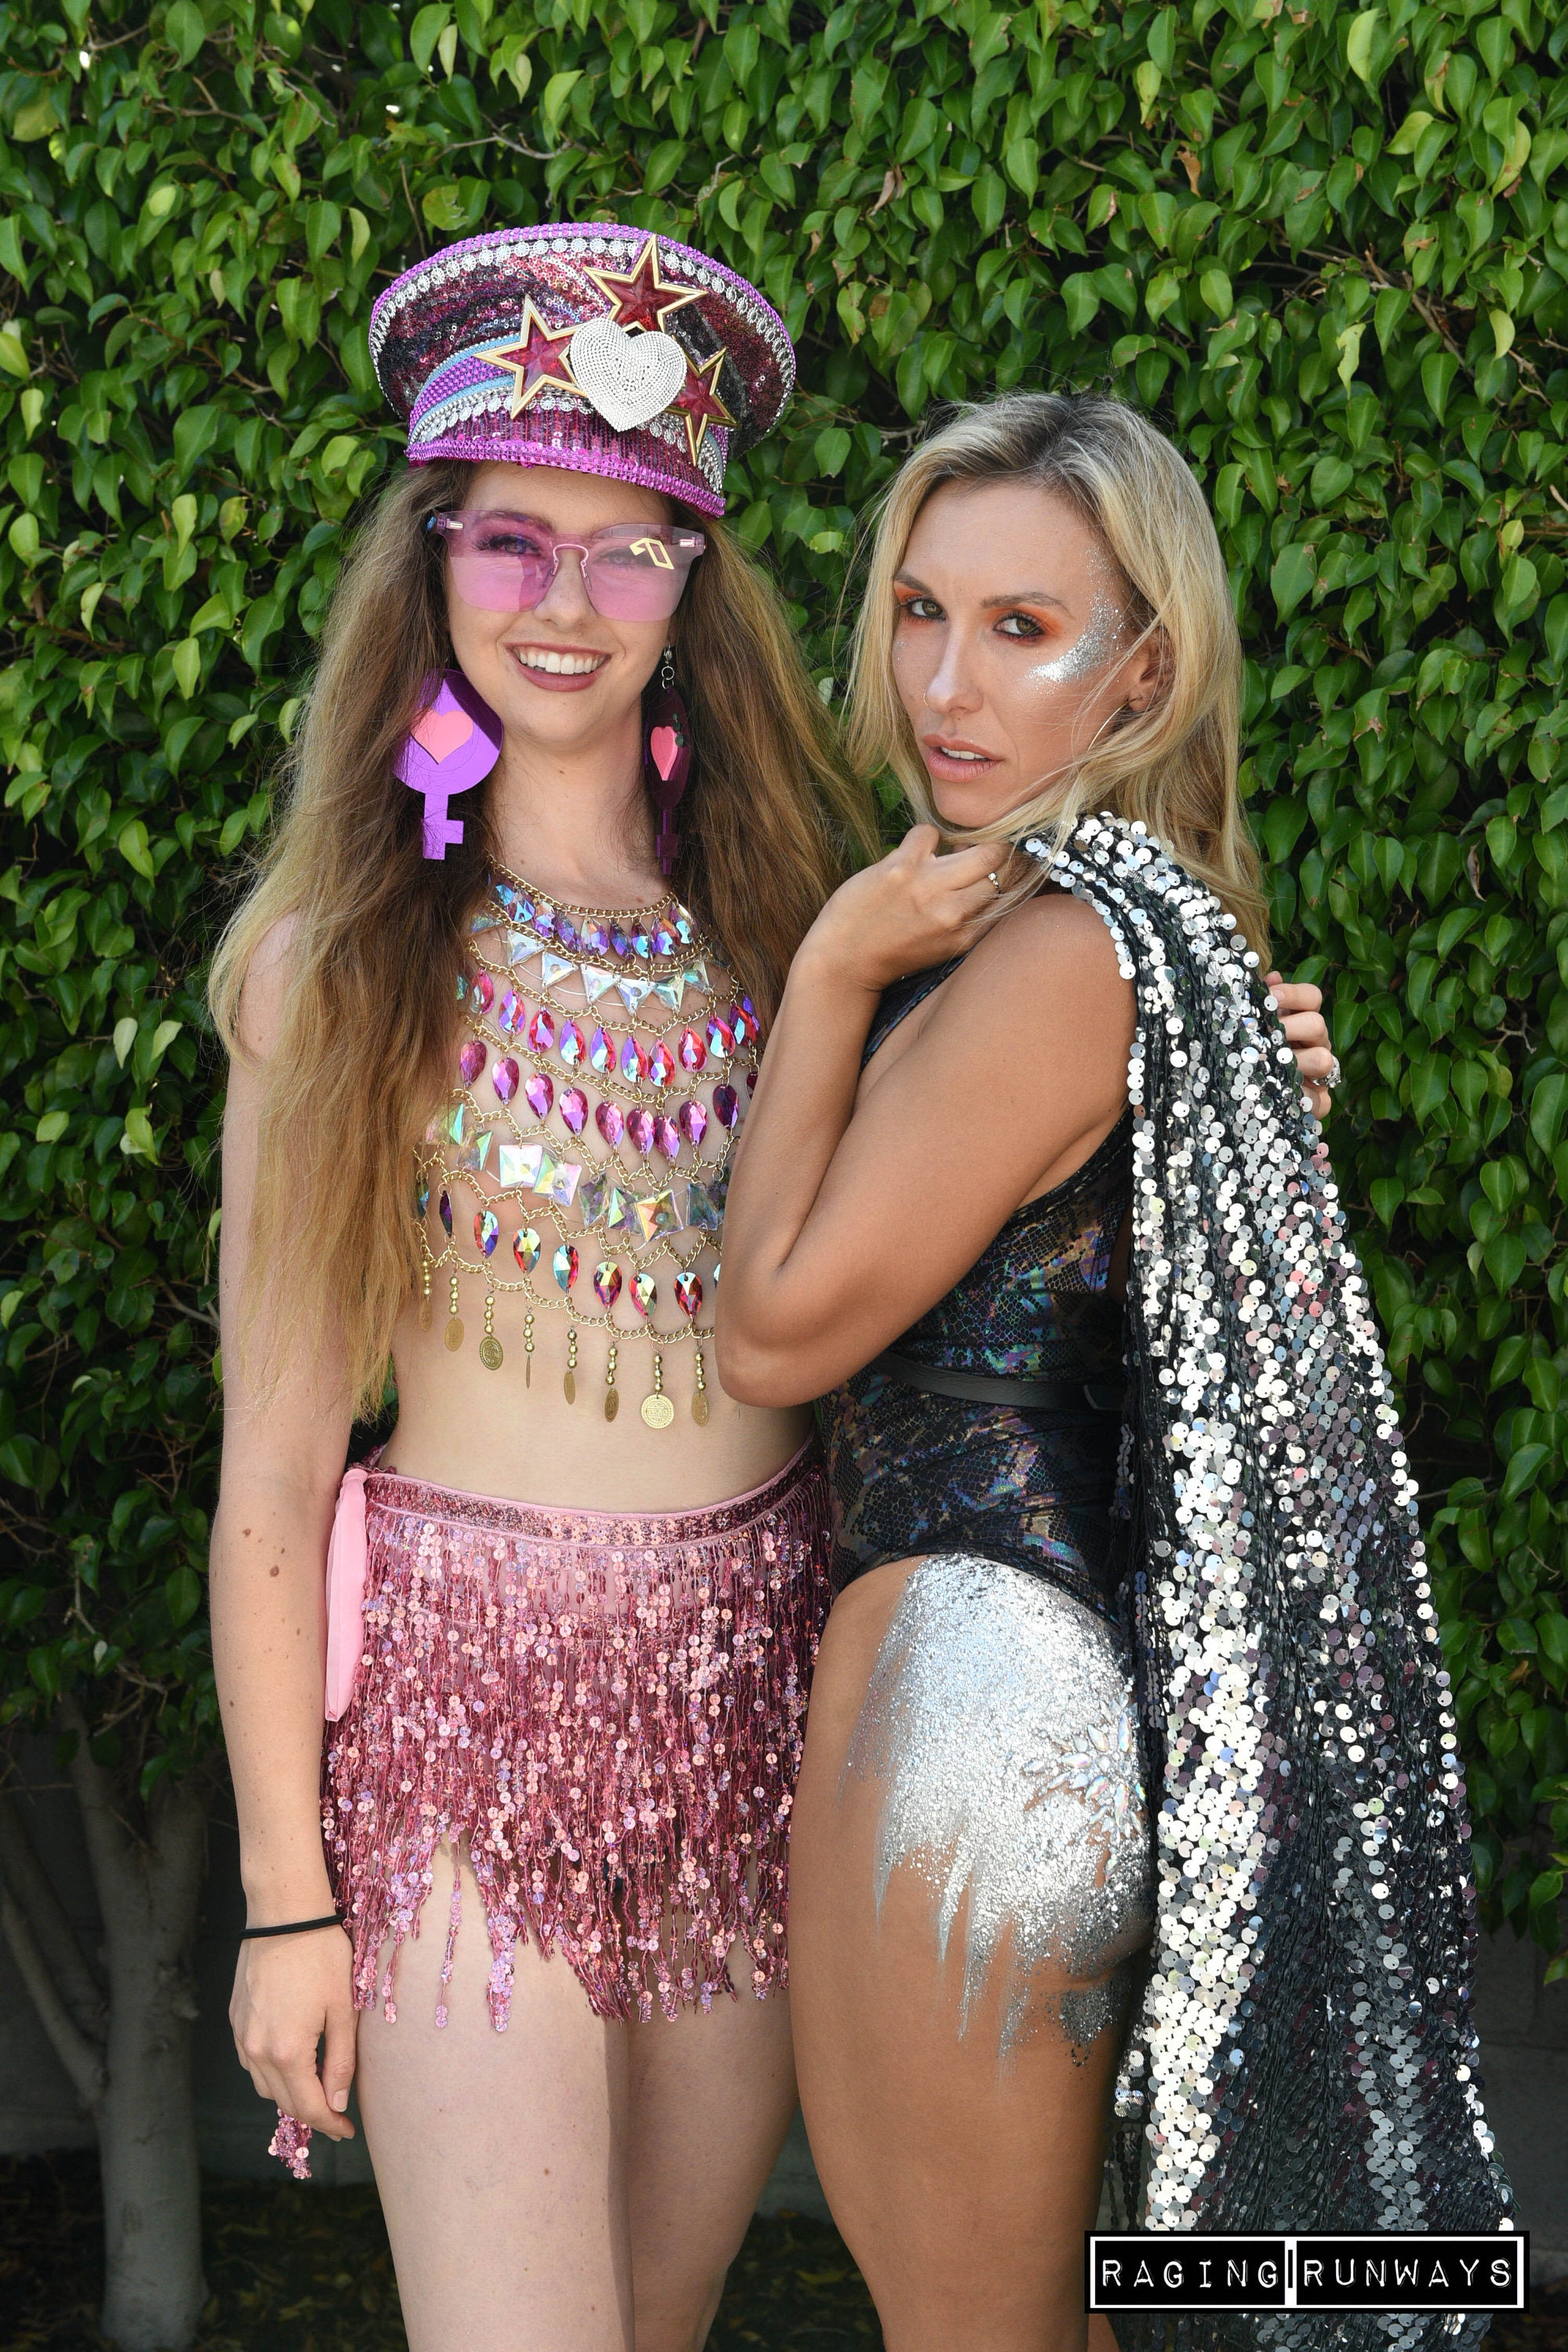 Princess Chain Crop Top, Rave Bra, Edc Outfit Burning Man Outfit -   Canada